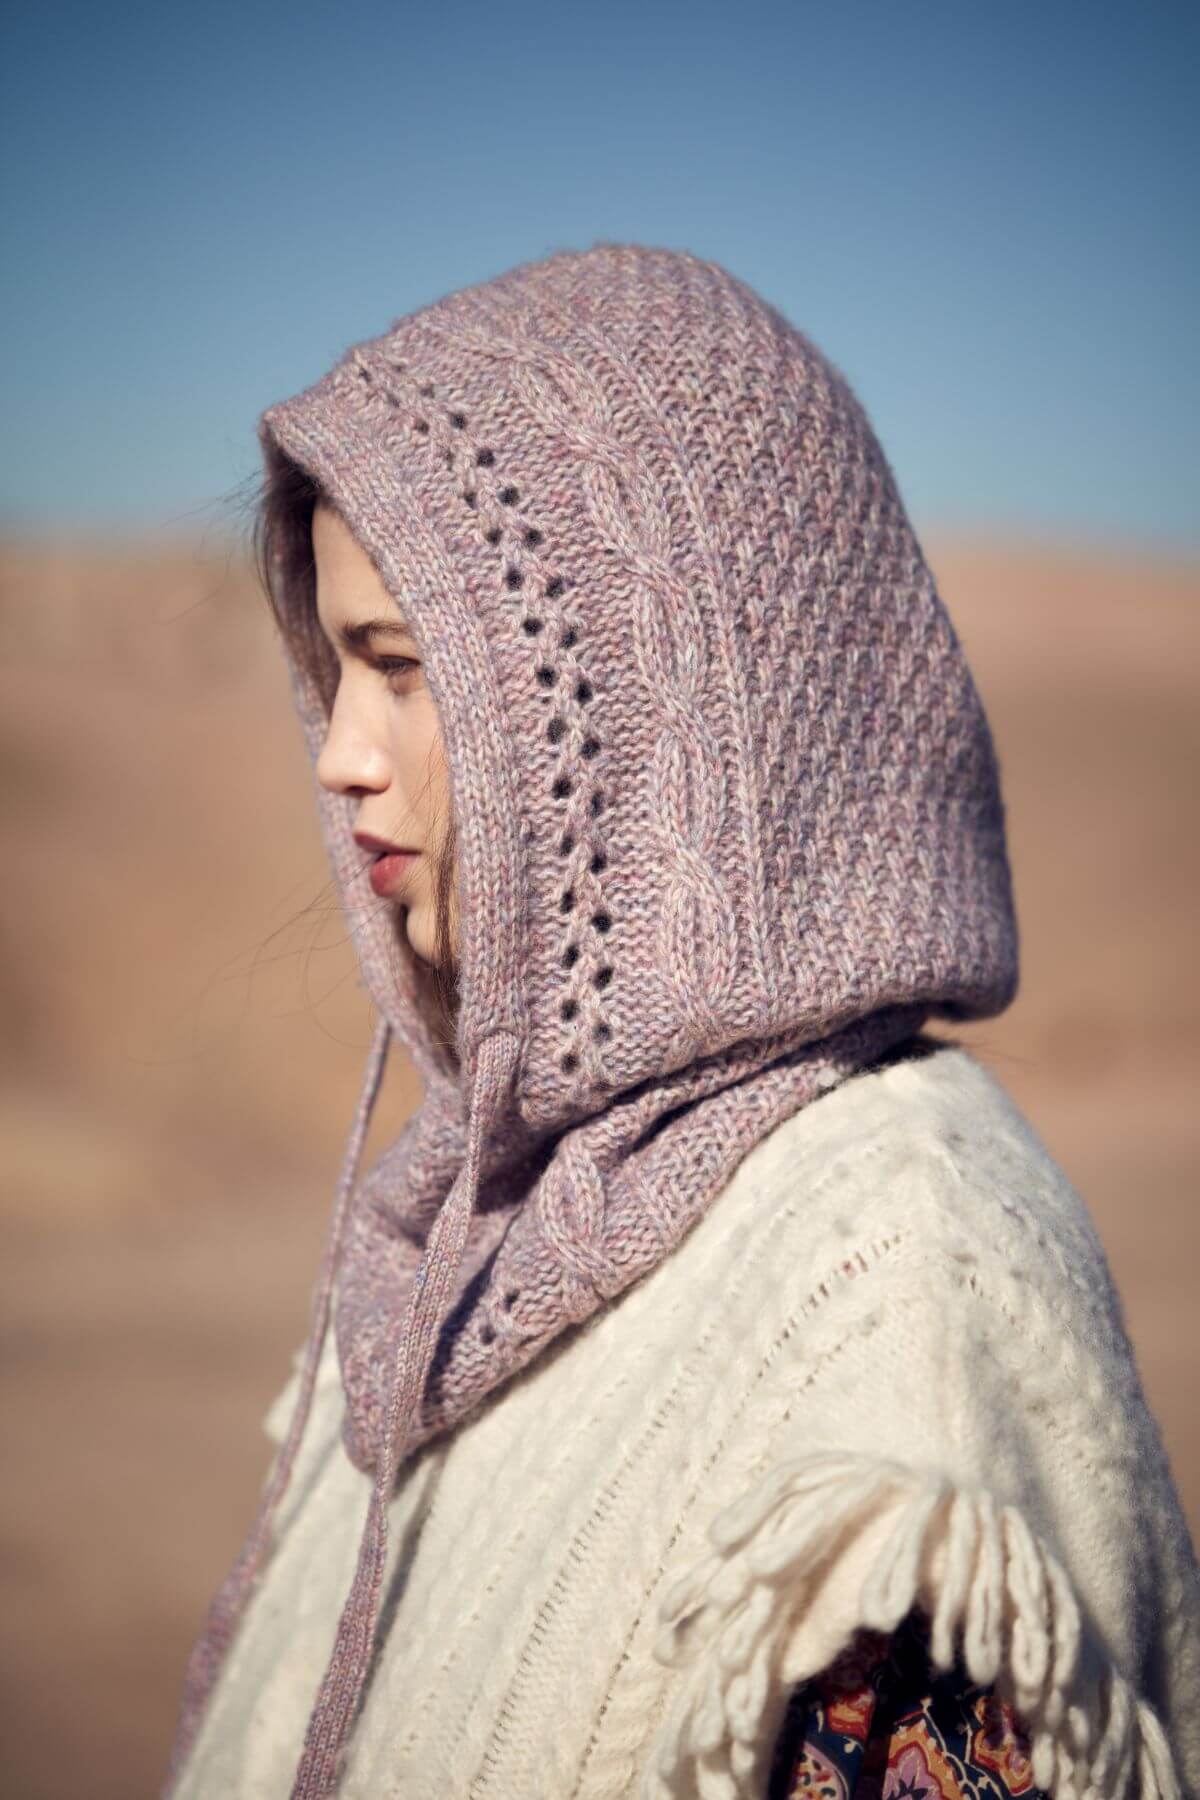 Shop women's hood/hat in mauve colour for cooler months online in Hong Kong and Singapore at MiliMilu by Louise Misha. This women's hood will keep you warm and stylish as it can also be worn also traveling. Shop women's sustainable accessories, hats and presents for celebrations and Christmas online at MiliMilu.